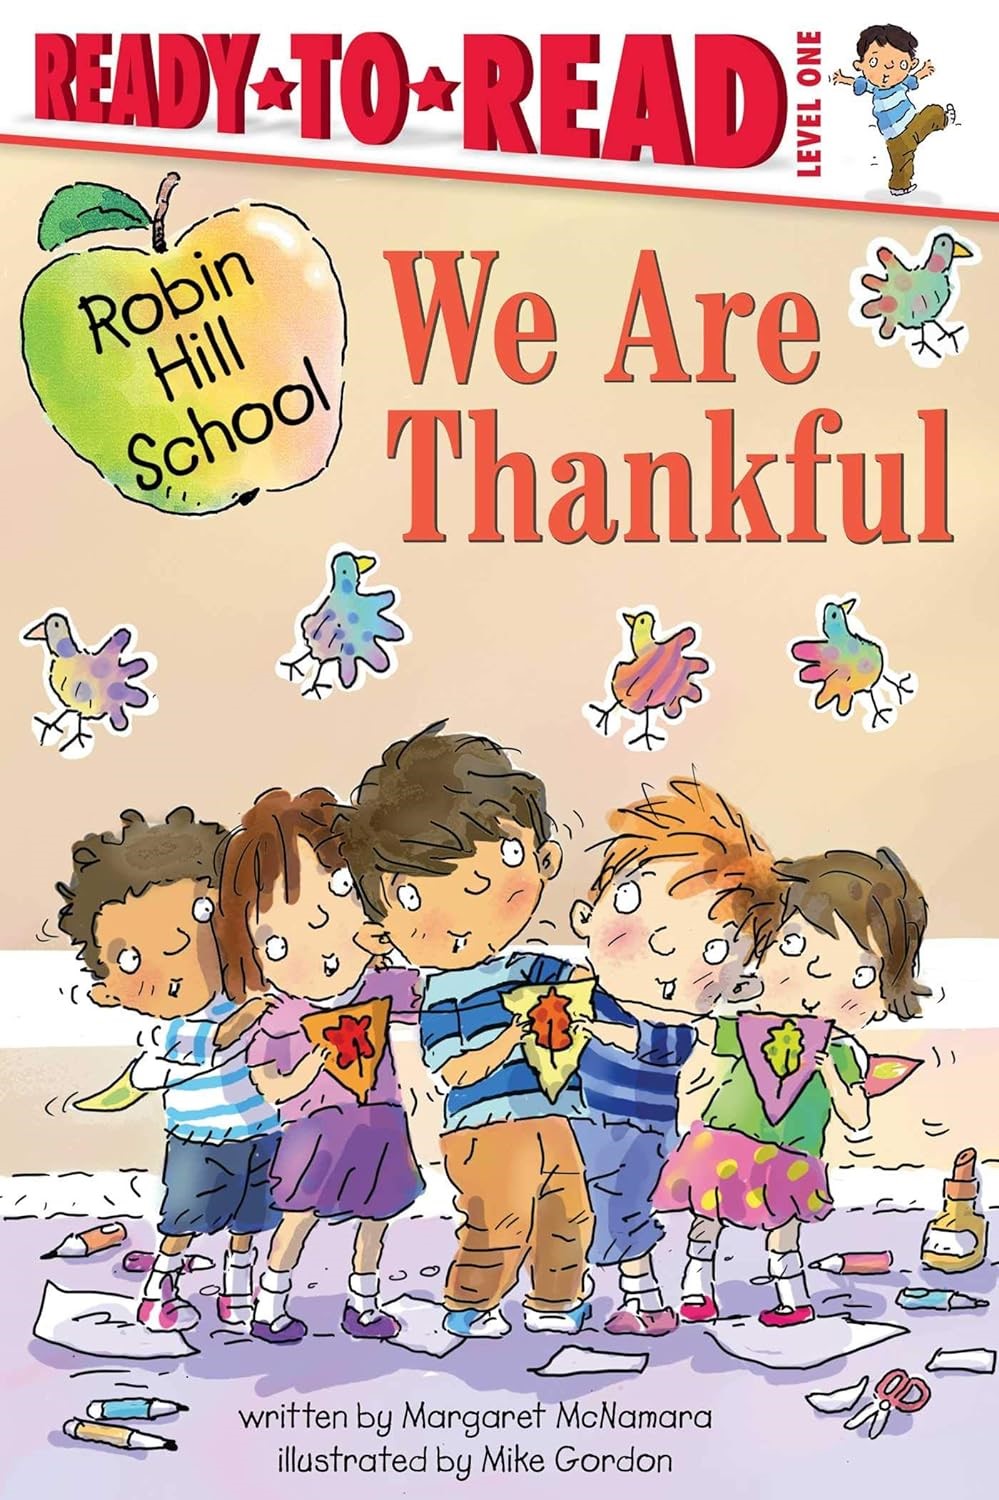 The Beginning Readers Book Club will read this is the book at the November 1st meeting